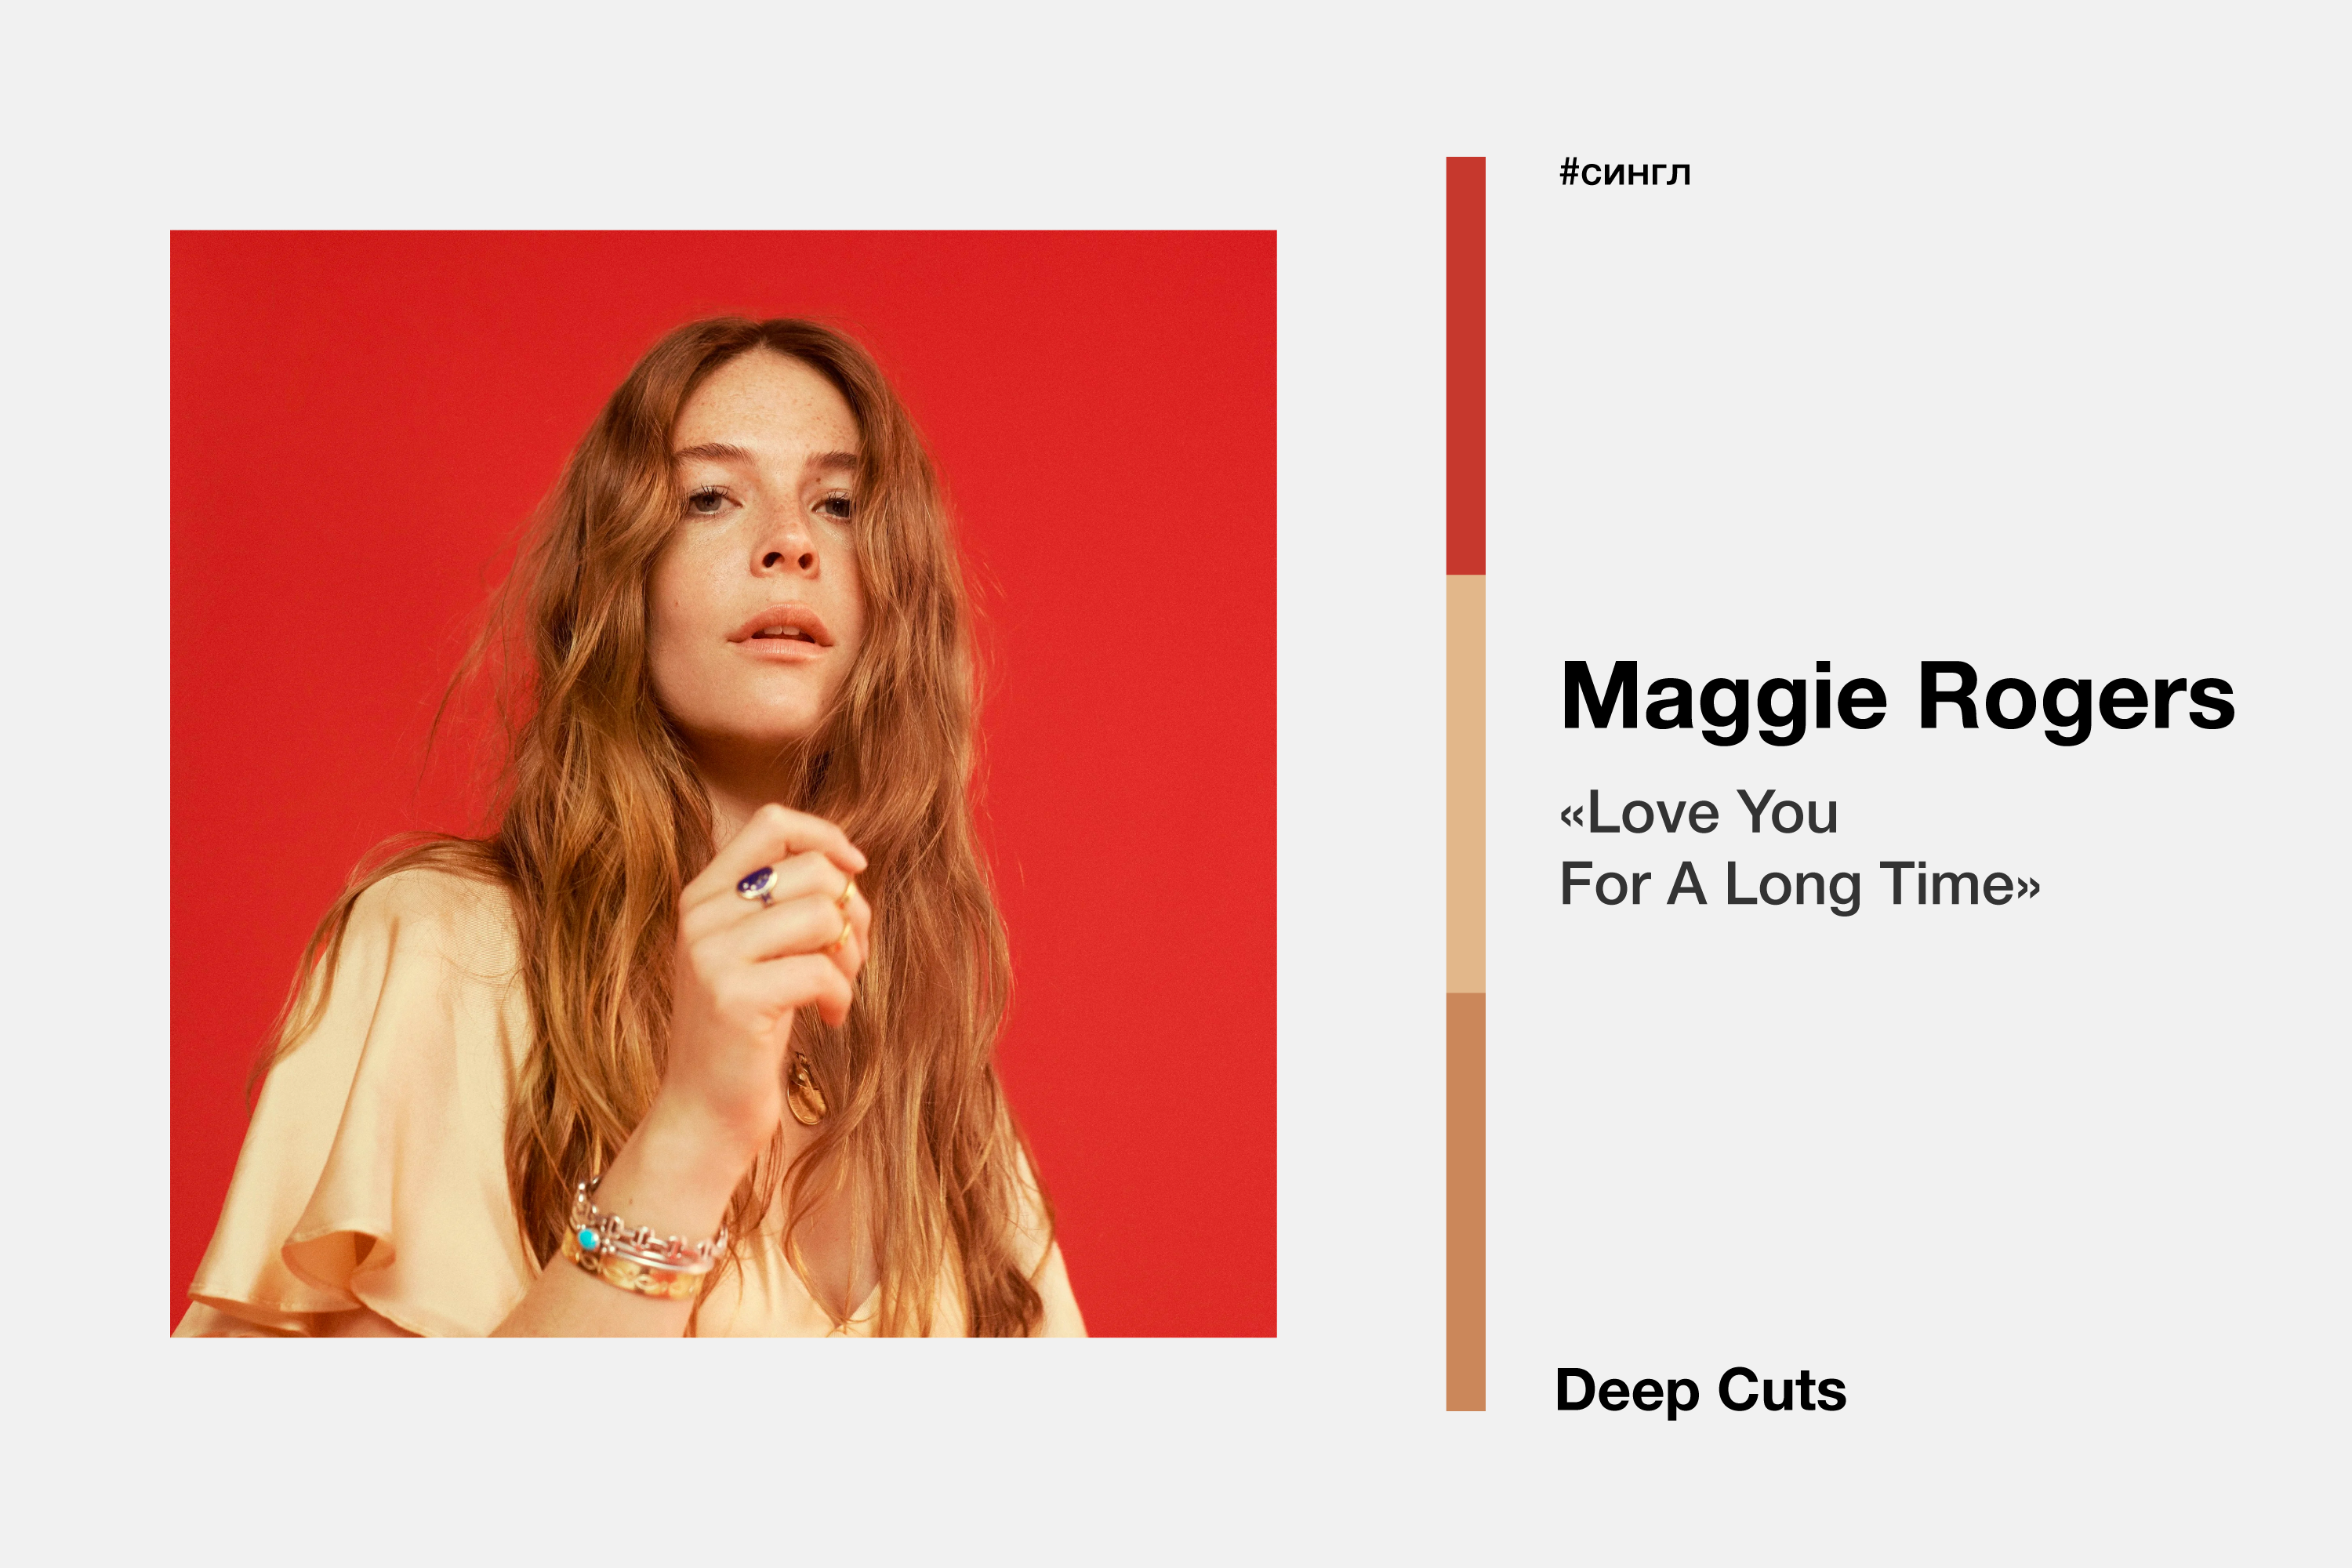 Maggie Rogers - "Love You For A Long Time" .